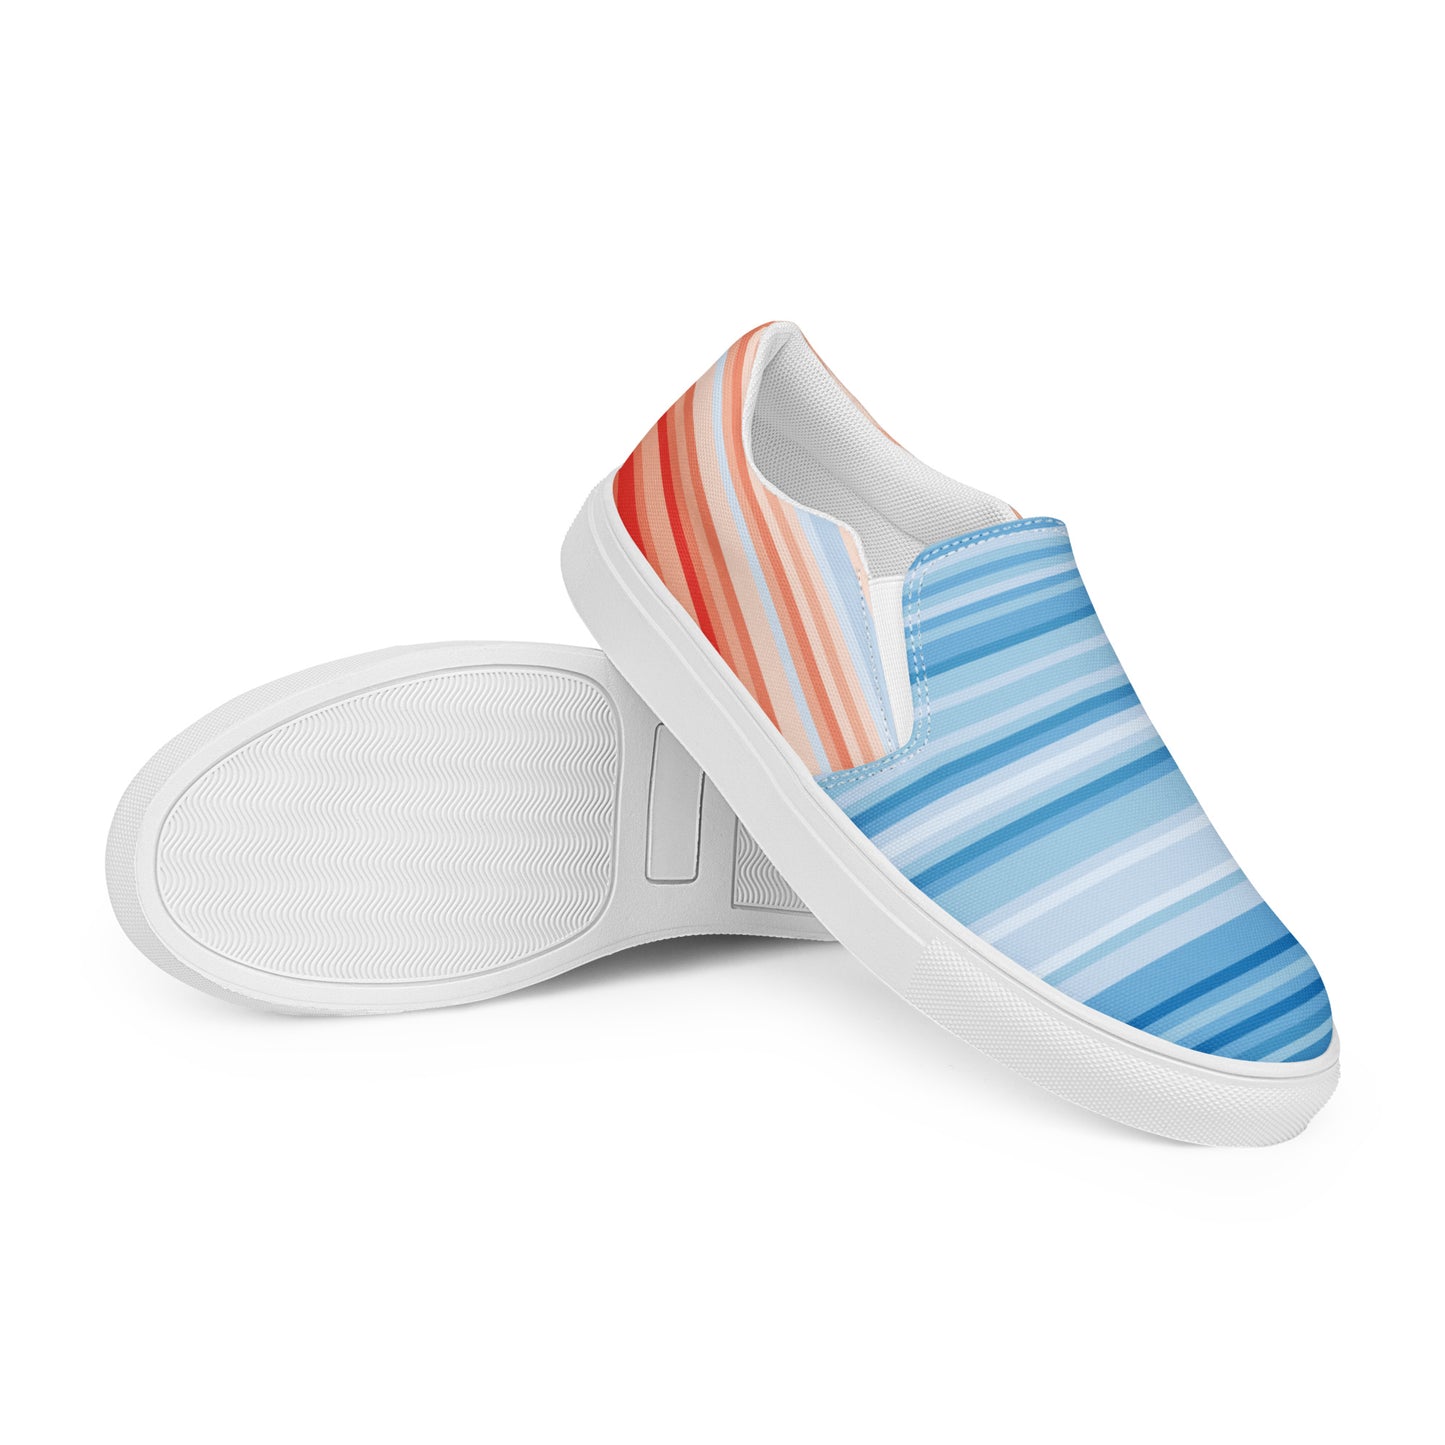 Climate Change Global Warming Stripes - Sustainably Made Men’s slip-on canvas shoes